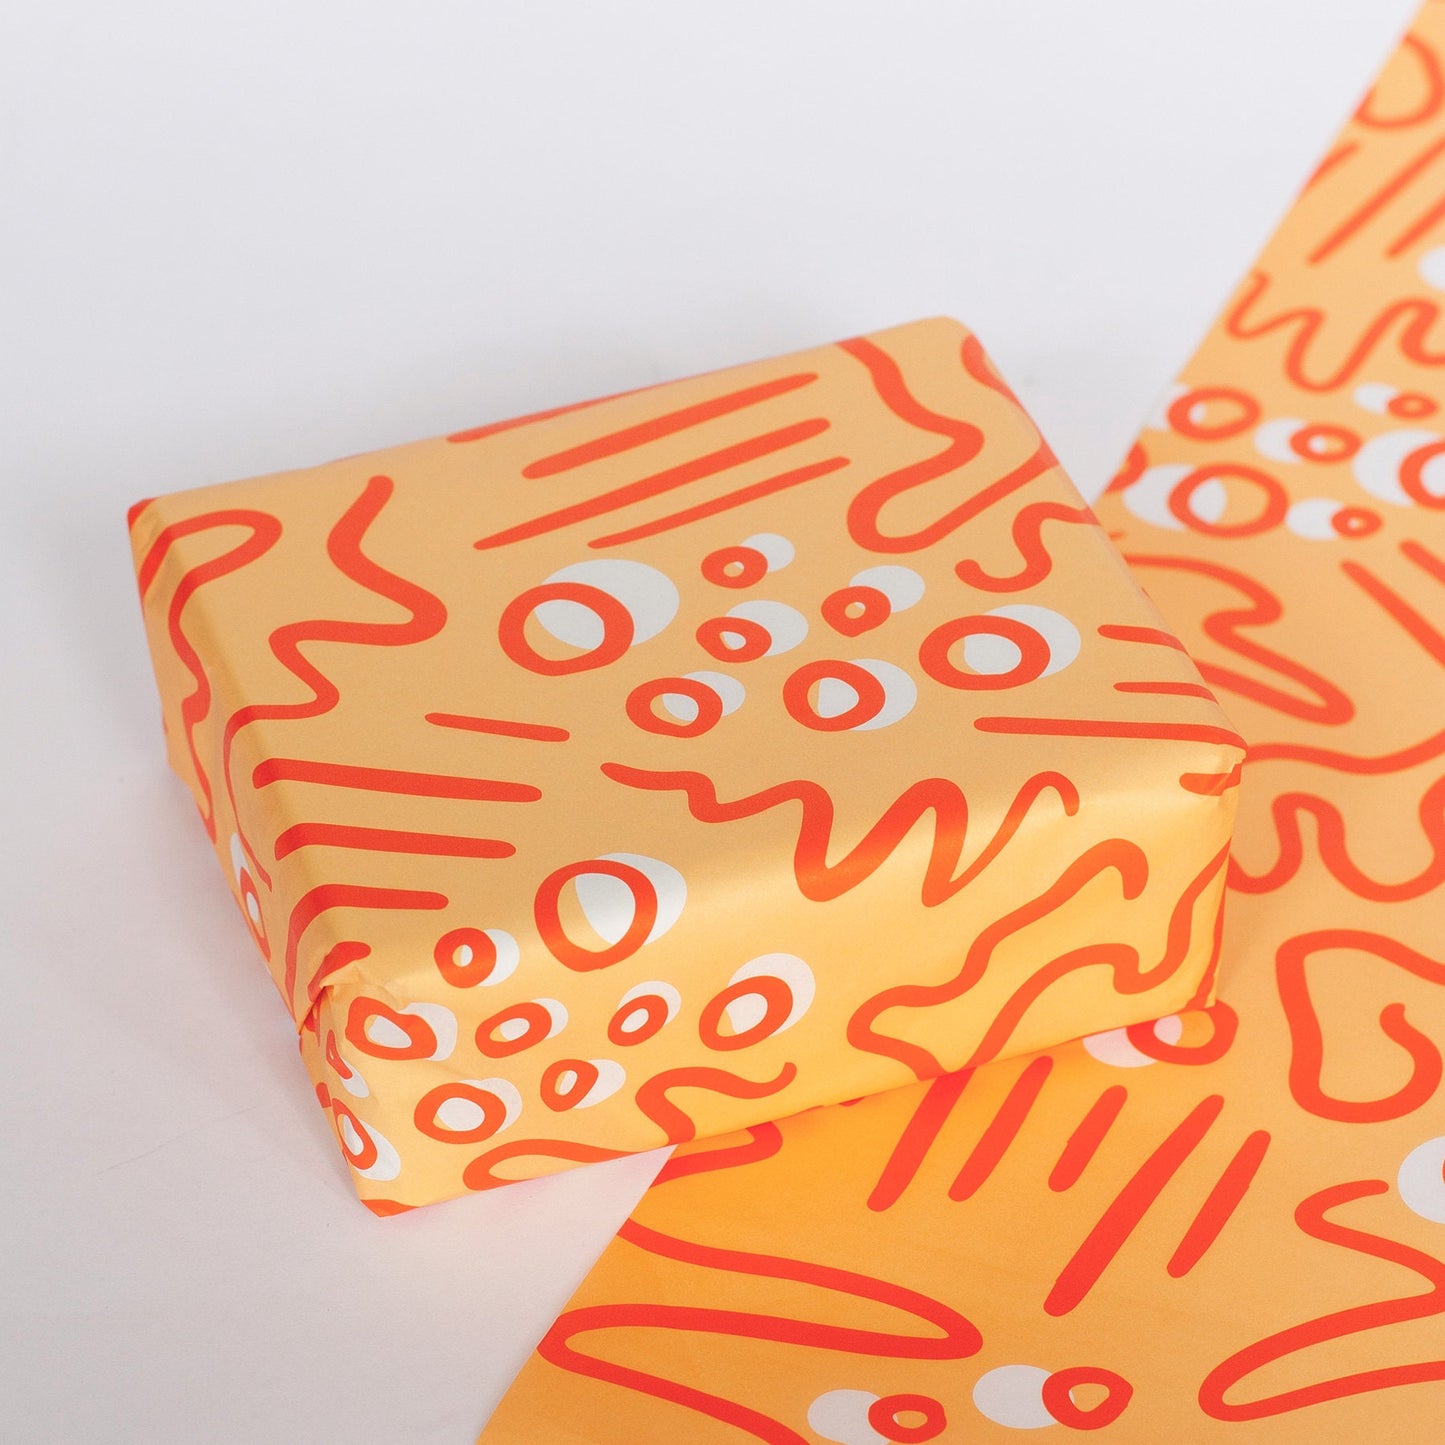 Tissue Paper Orange doodle, 500mm x 380mm Recyclable, Compostable, Biodegradable